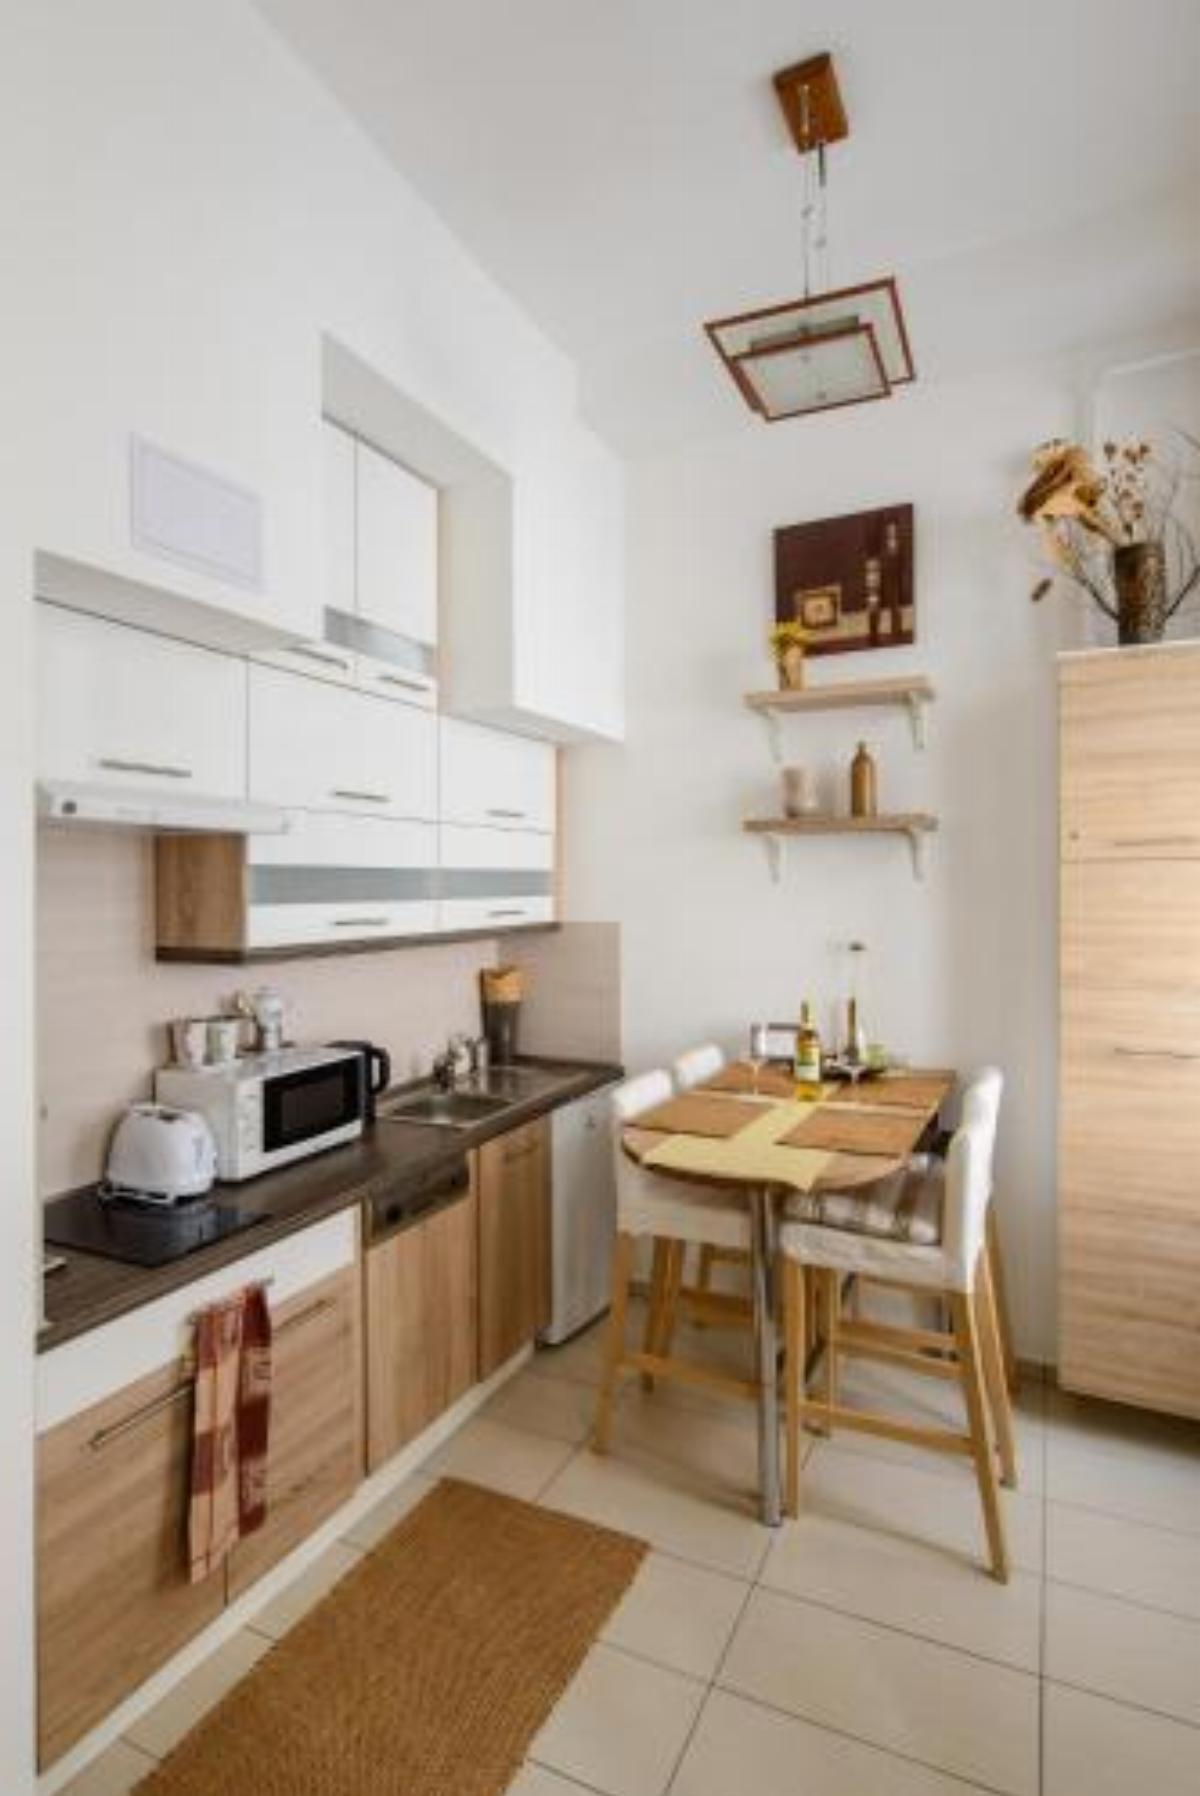 PEARL 2Bedrooms with Loft Apartment Hotel Budapest Hungary